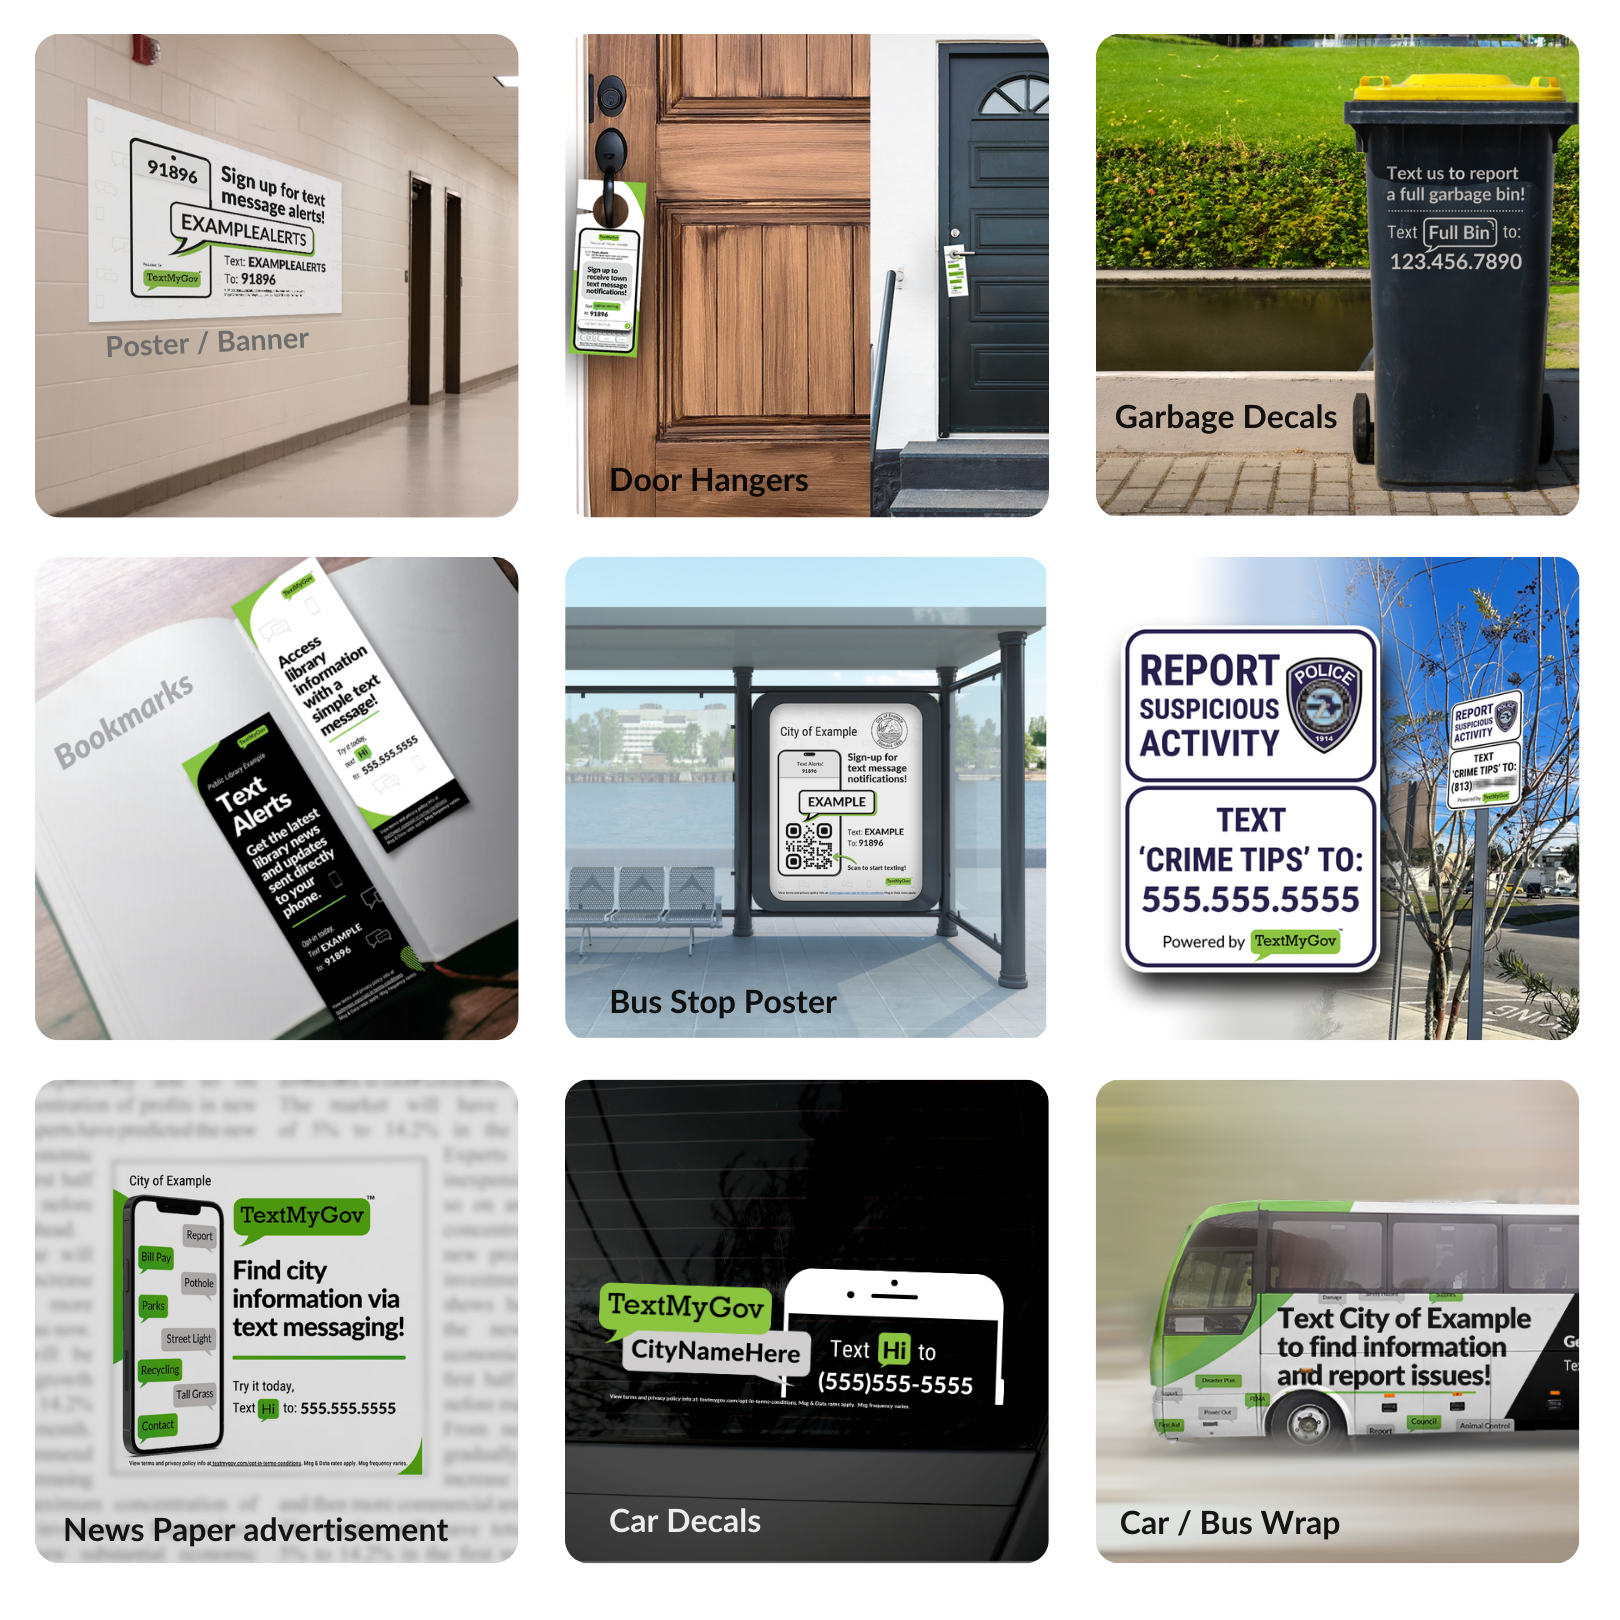 An image of Custom Design Examples. Poster / Banner, Door Hangers, Garbage Decals, Bookmarks, Bus Stop Poster, Crime Tips Sign, News Paper Advertisement, Car Decals, and Bus Wrap.